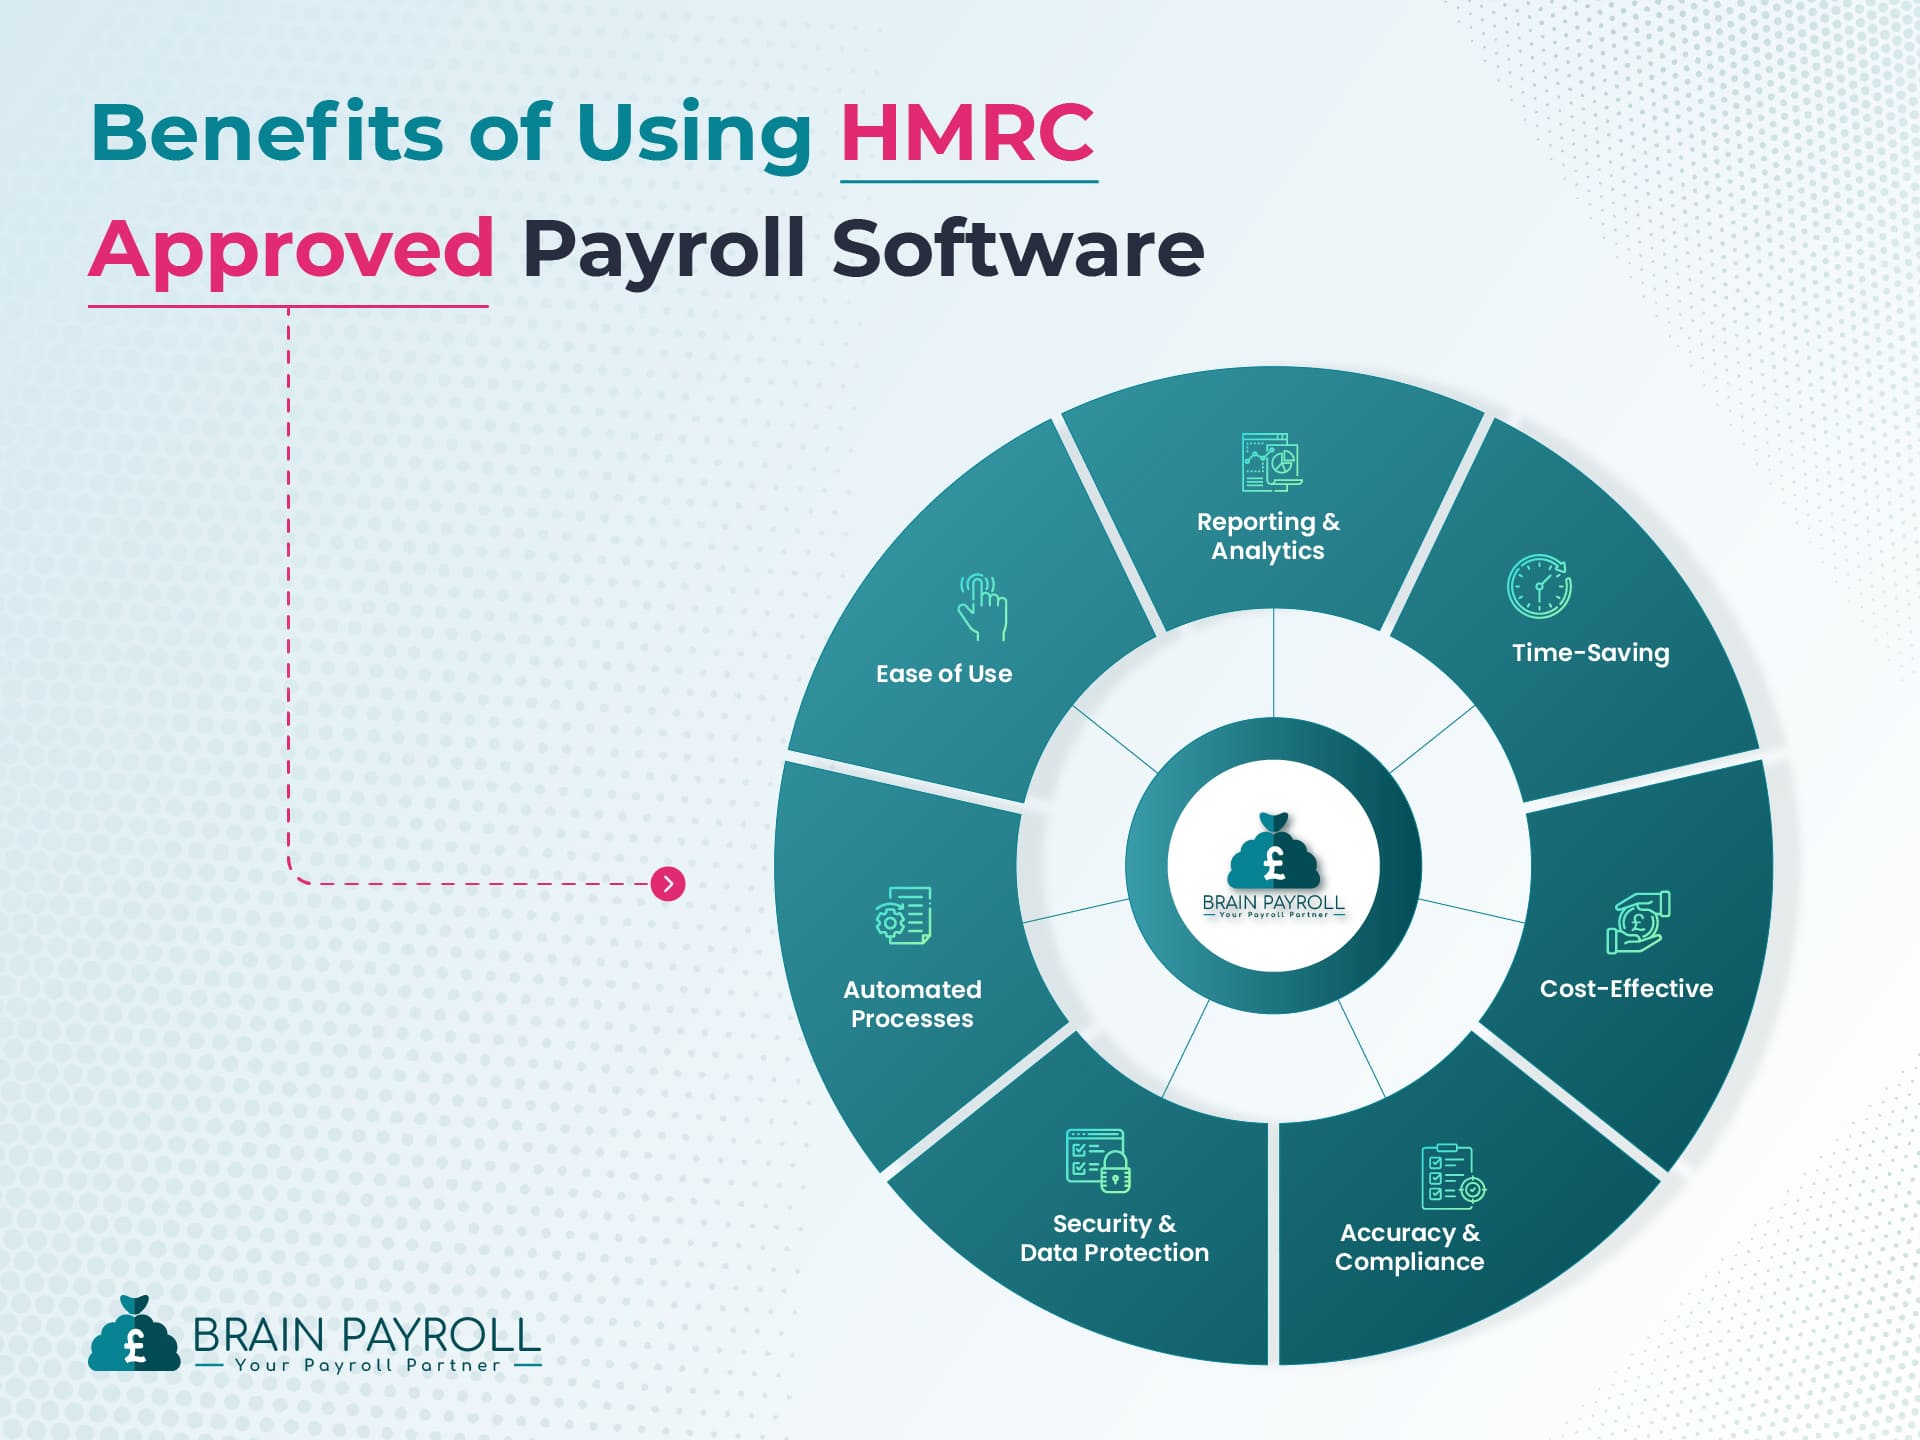 The Benefits of Using HMRC Approved Payroll Software